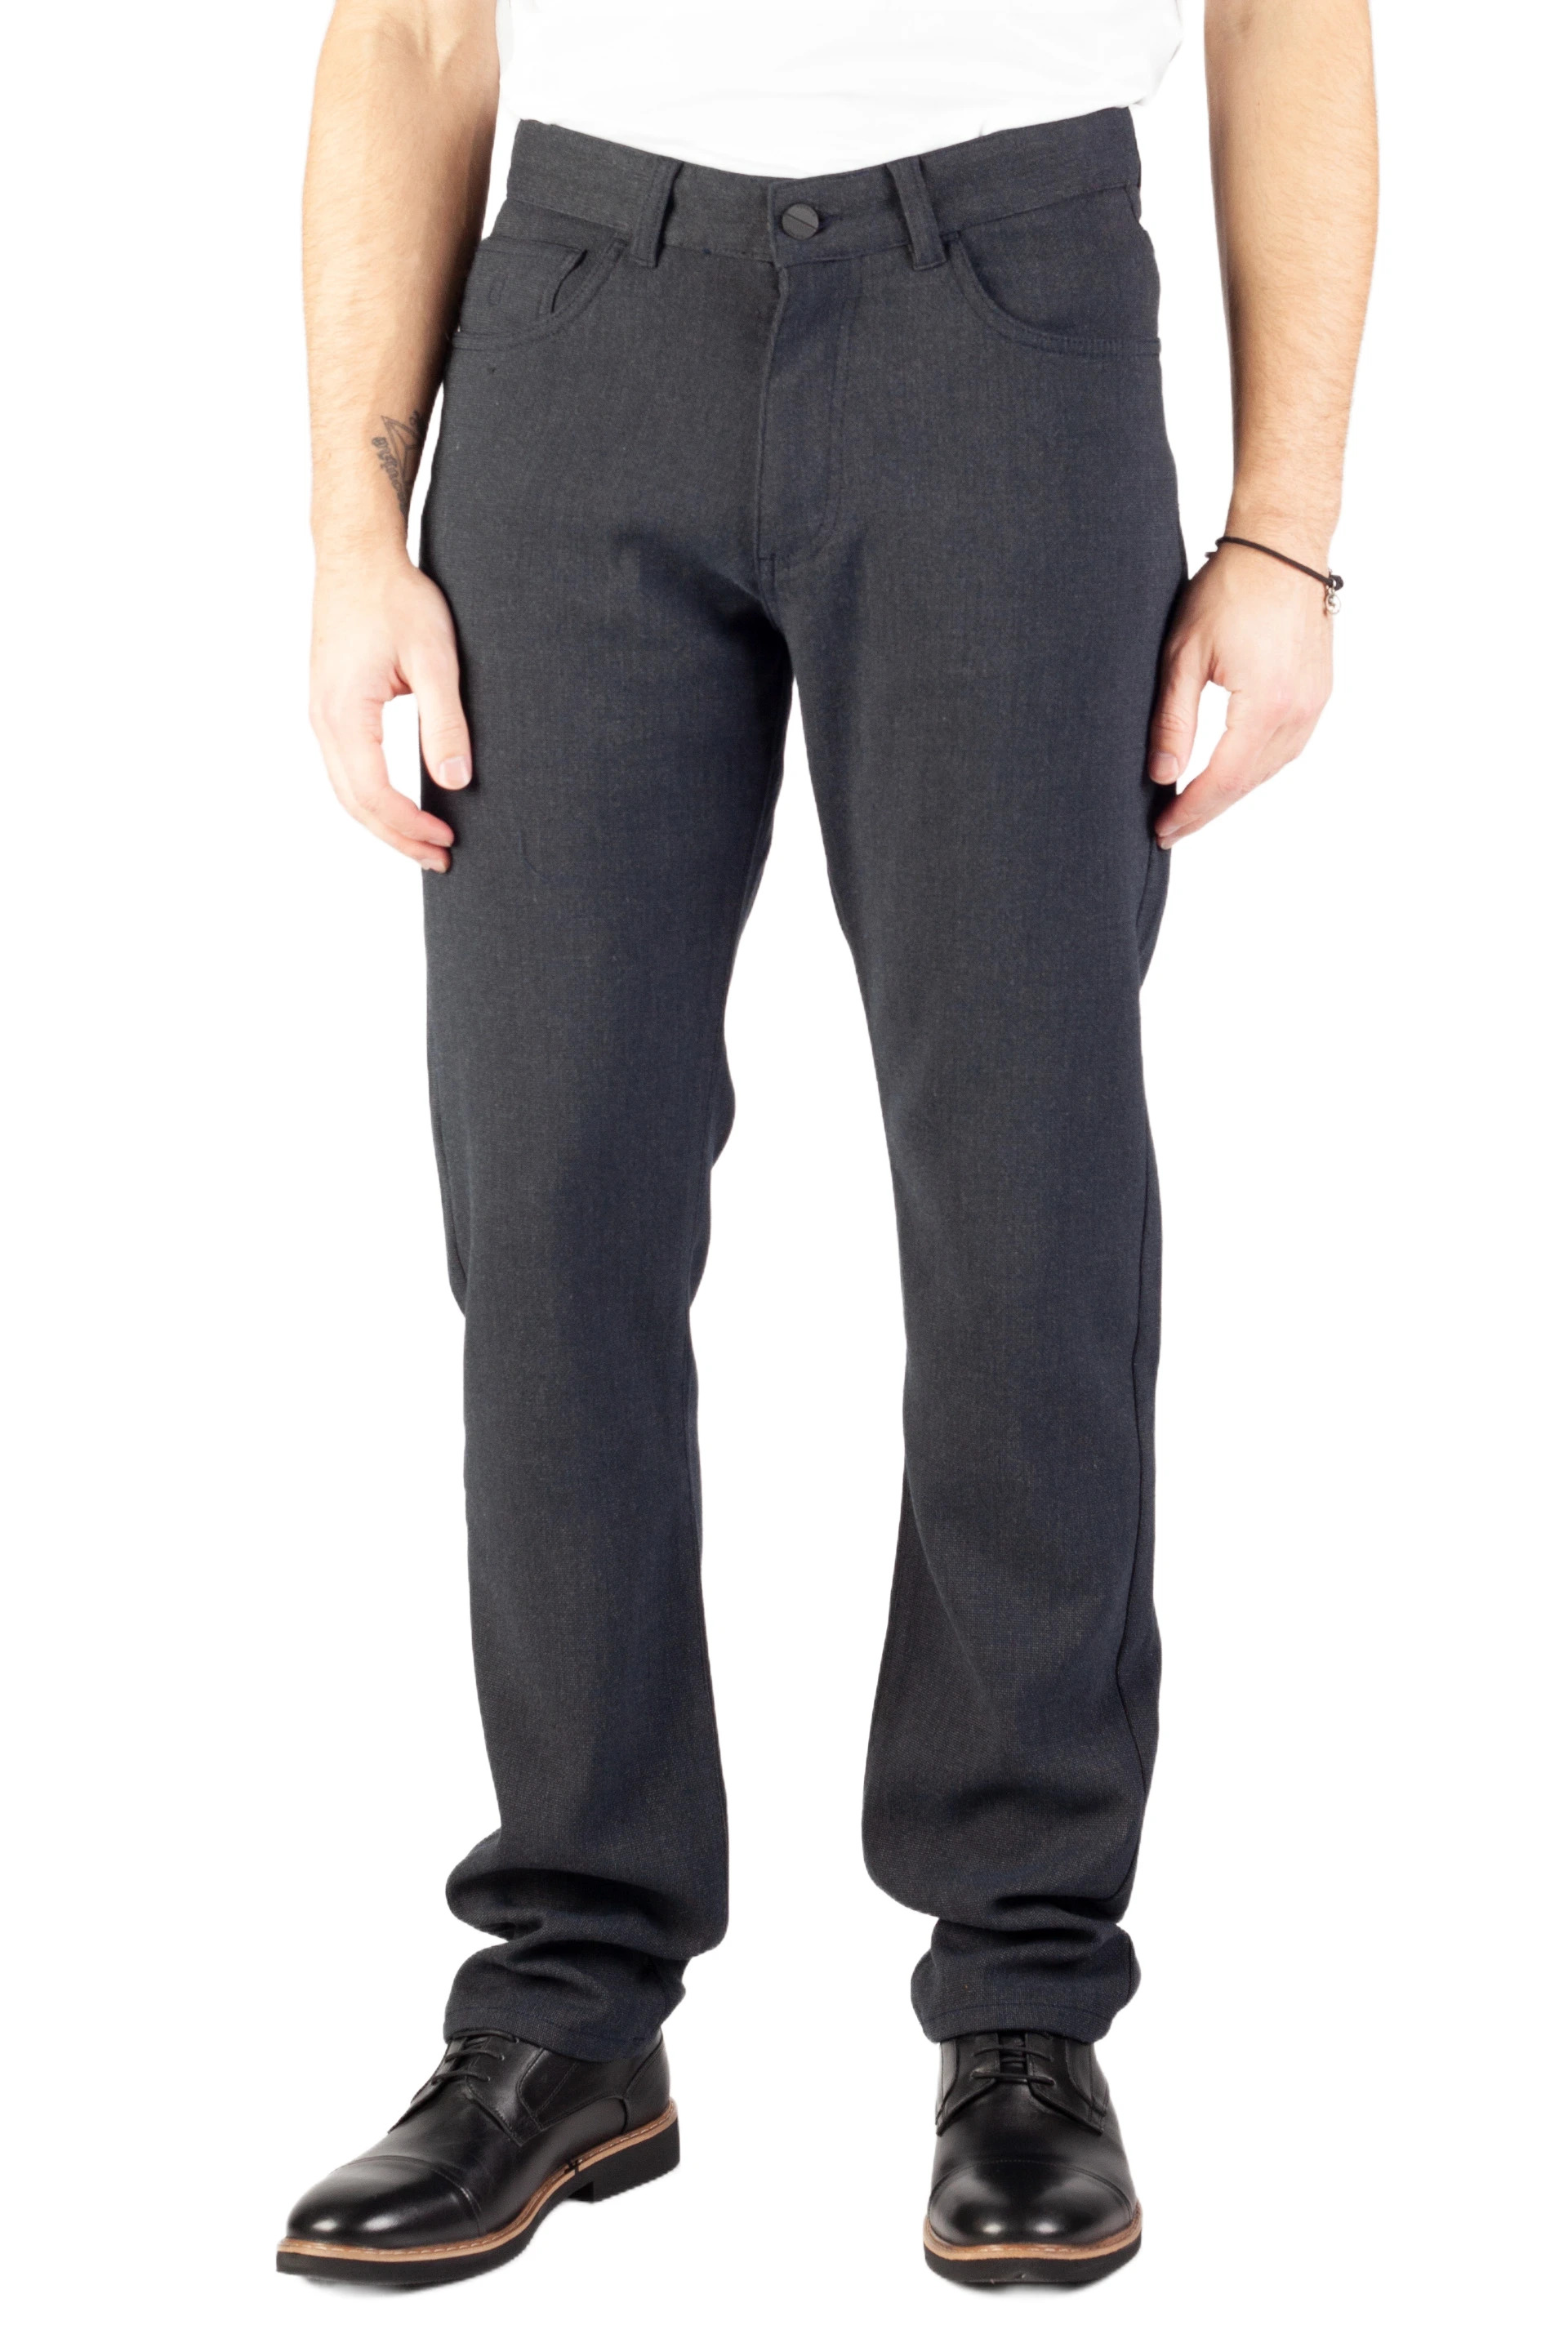 Chino pants BLK JEANS 8388-5178-104-201